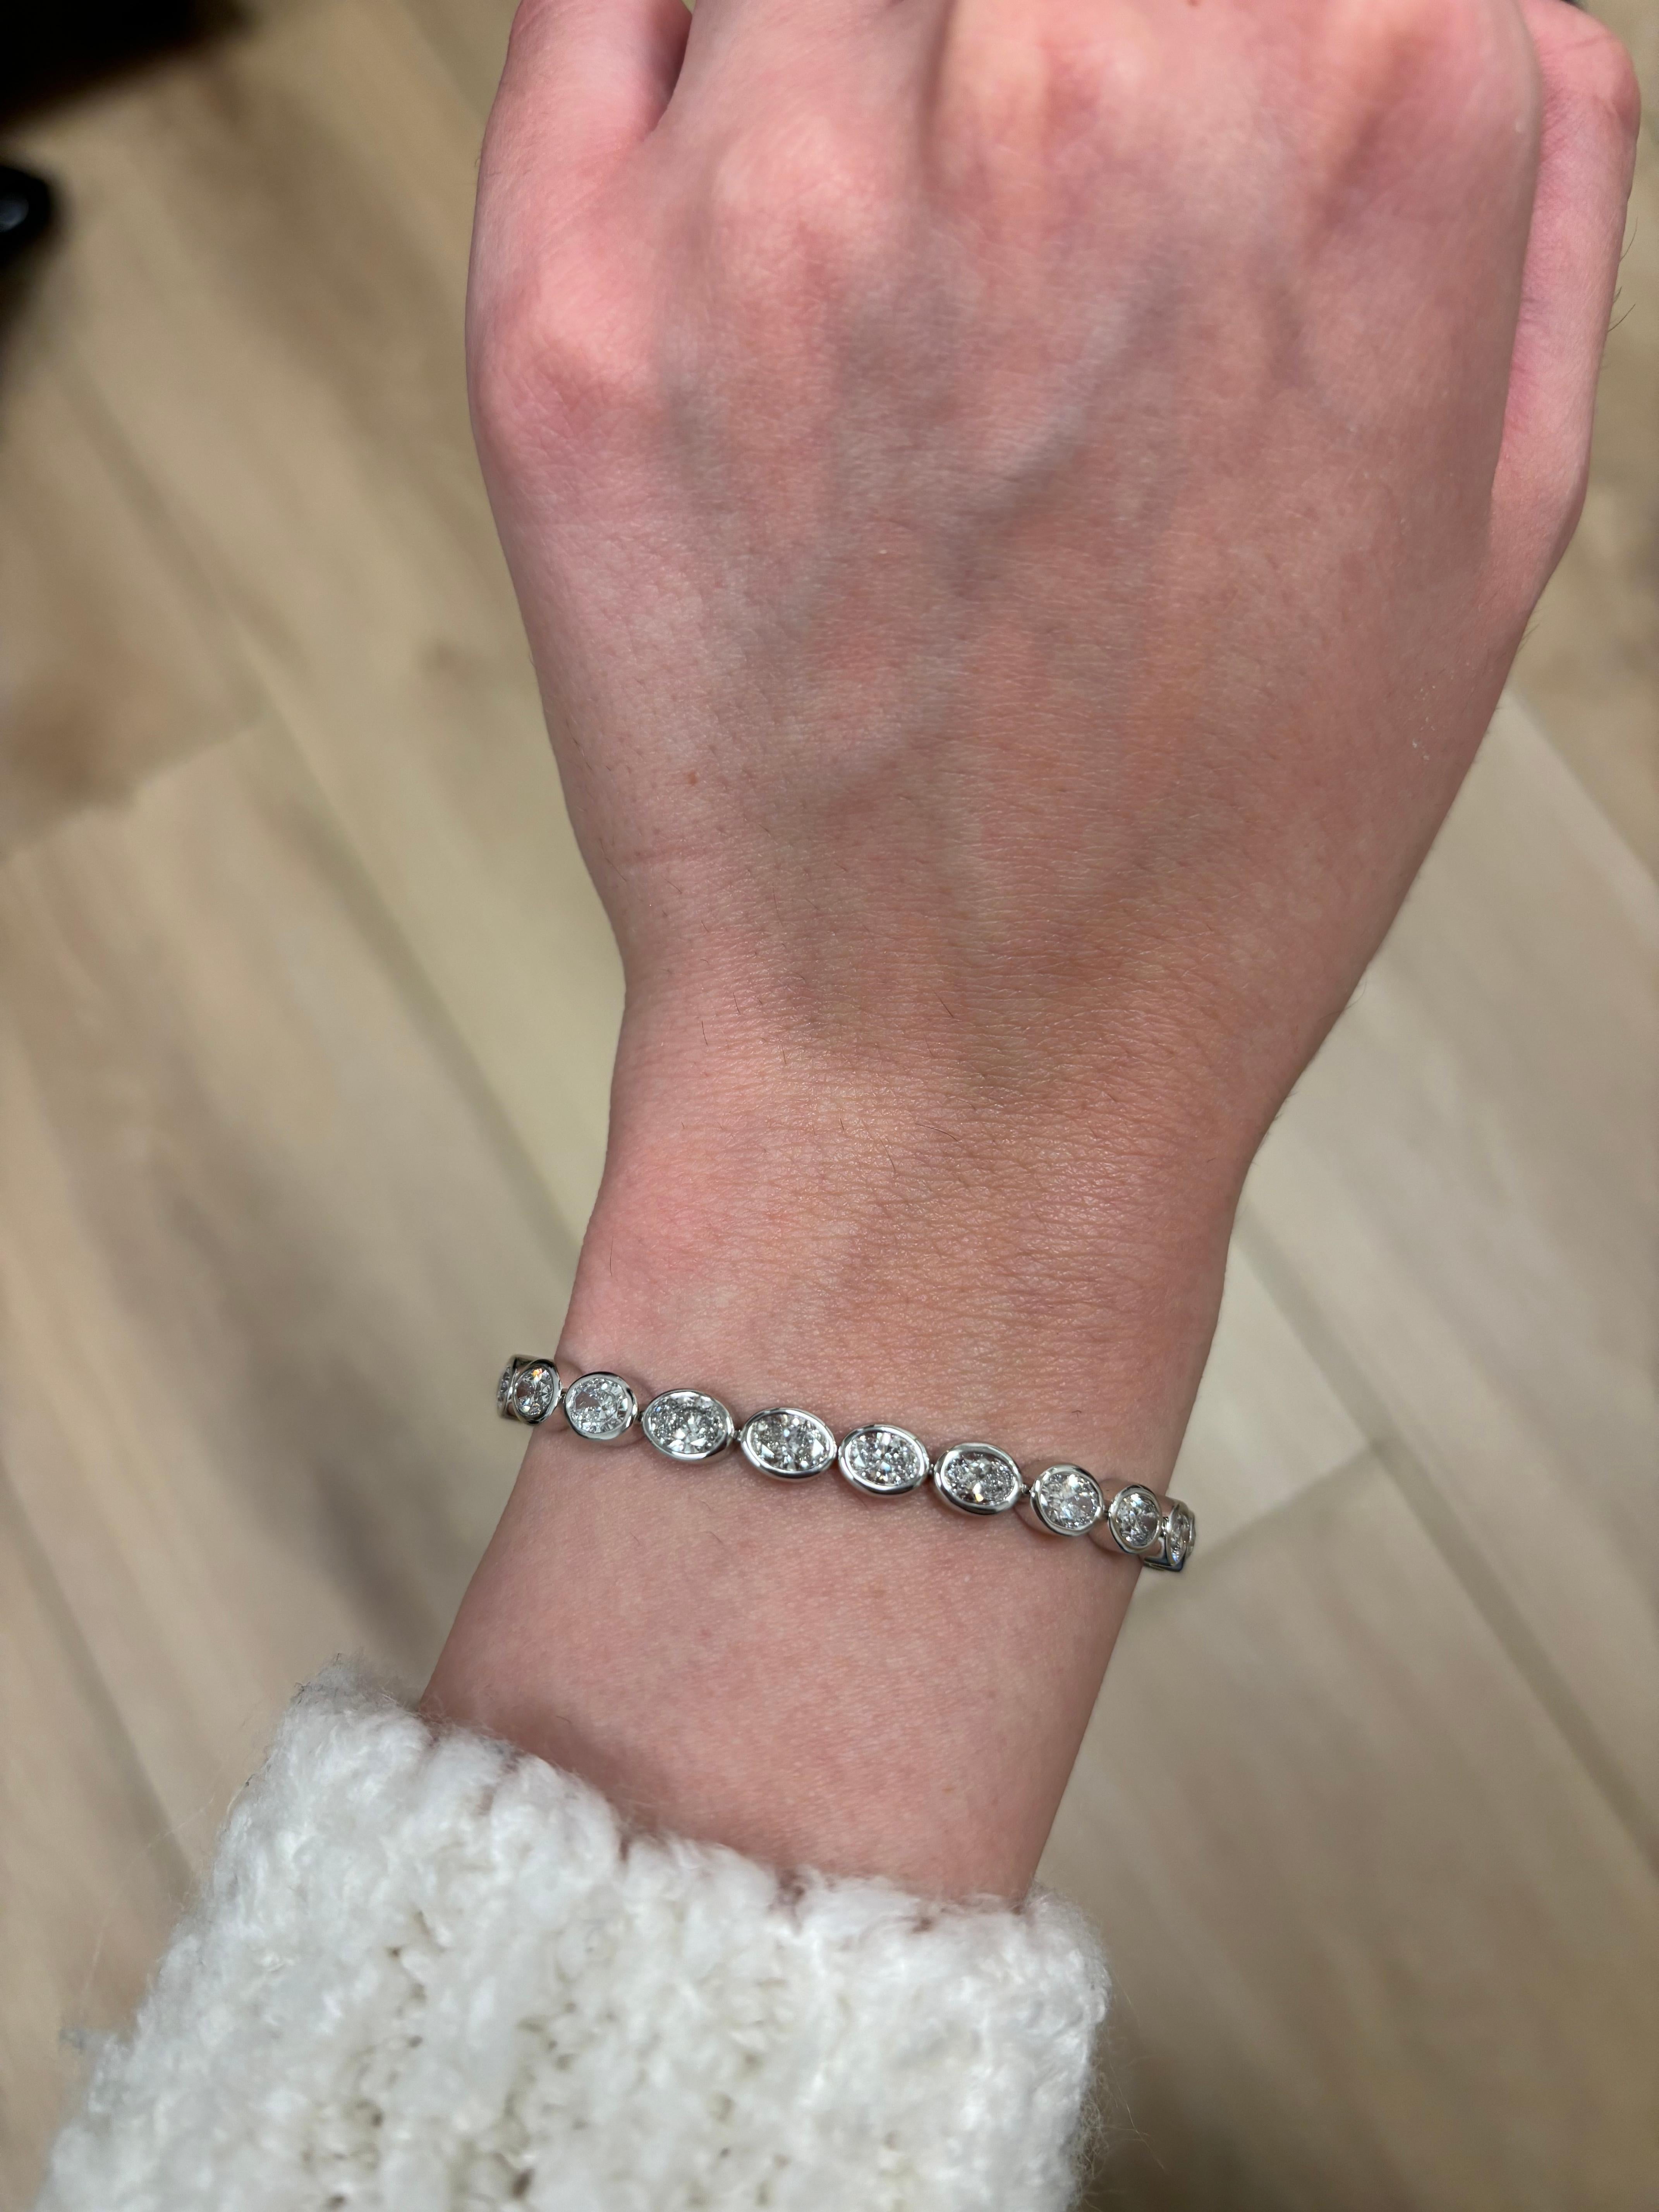 Stunning modern bezel set east-west oval cut diamond tennis bracelet. High jewelry by Alexander Beverly Hills.
27 oval cut diamonds, 8.46 carats. Approximately F/G color and SI clarity. 18k white gold, 14.87 grams, 7.25 inches.
Accommodated with an